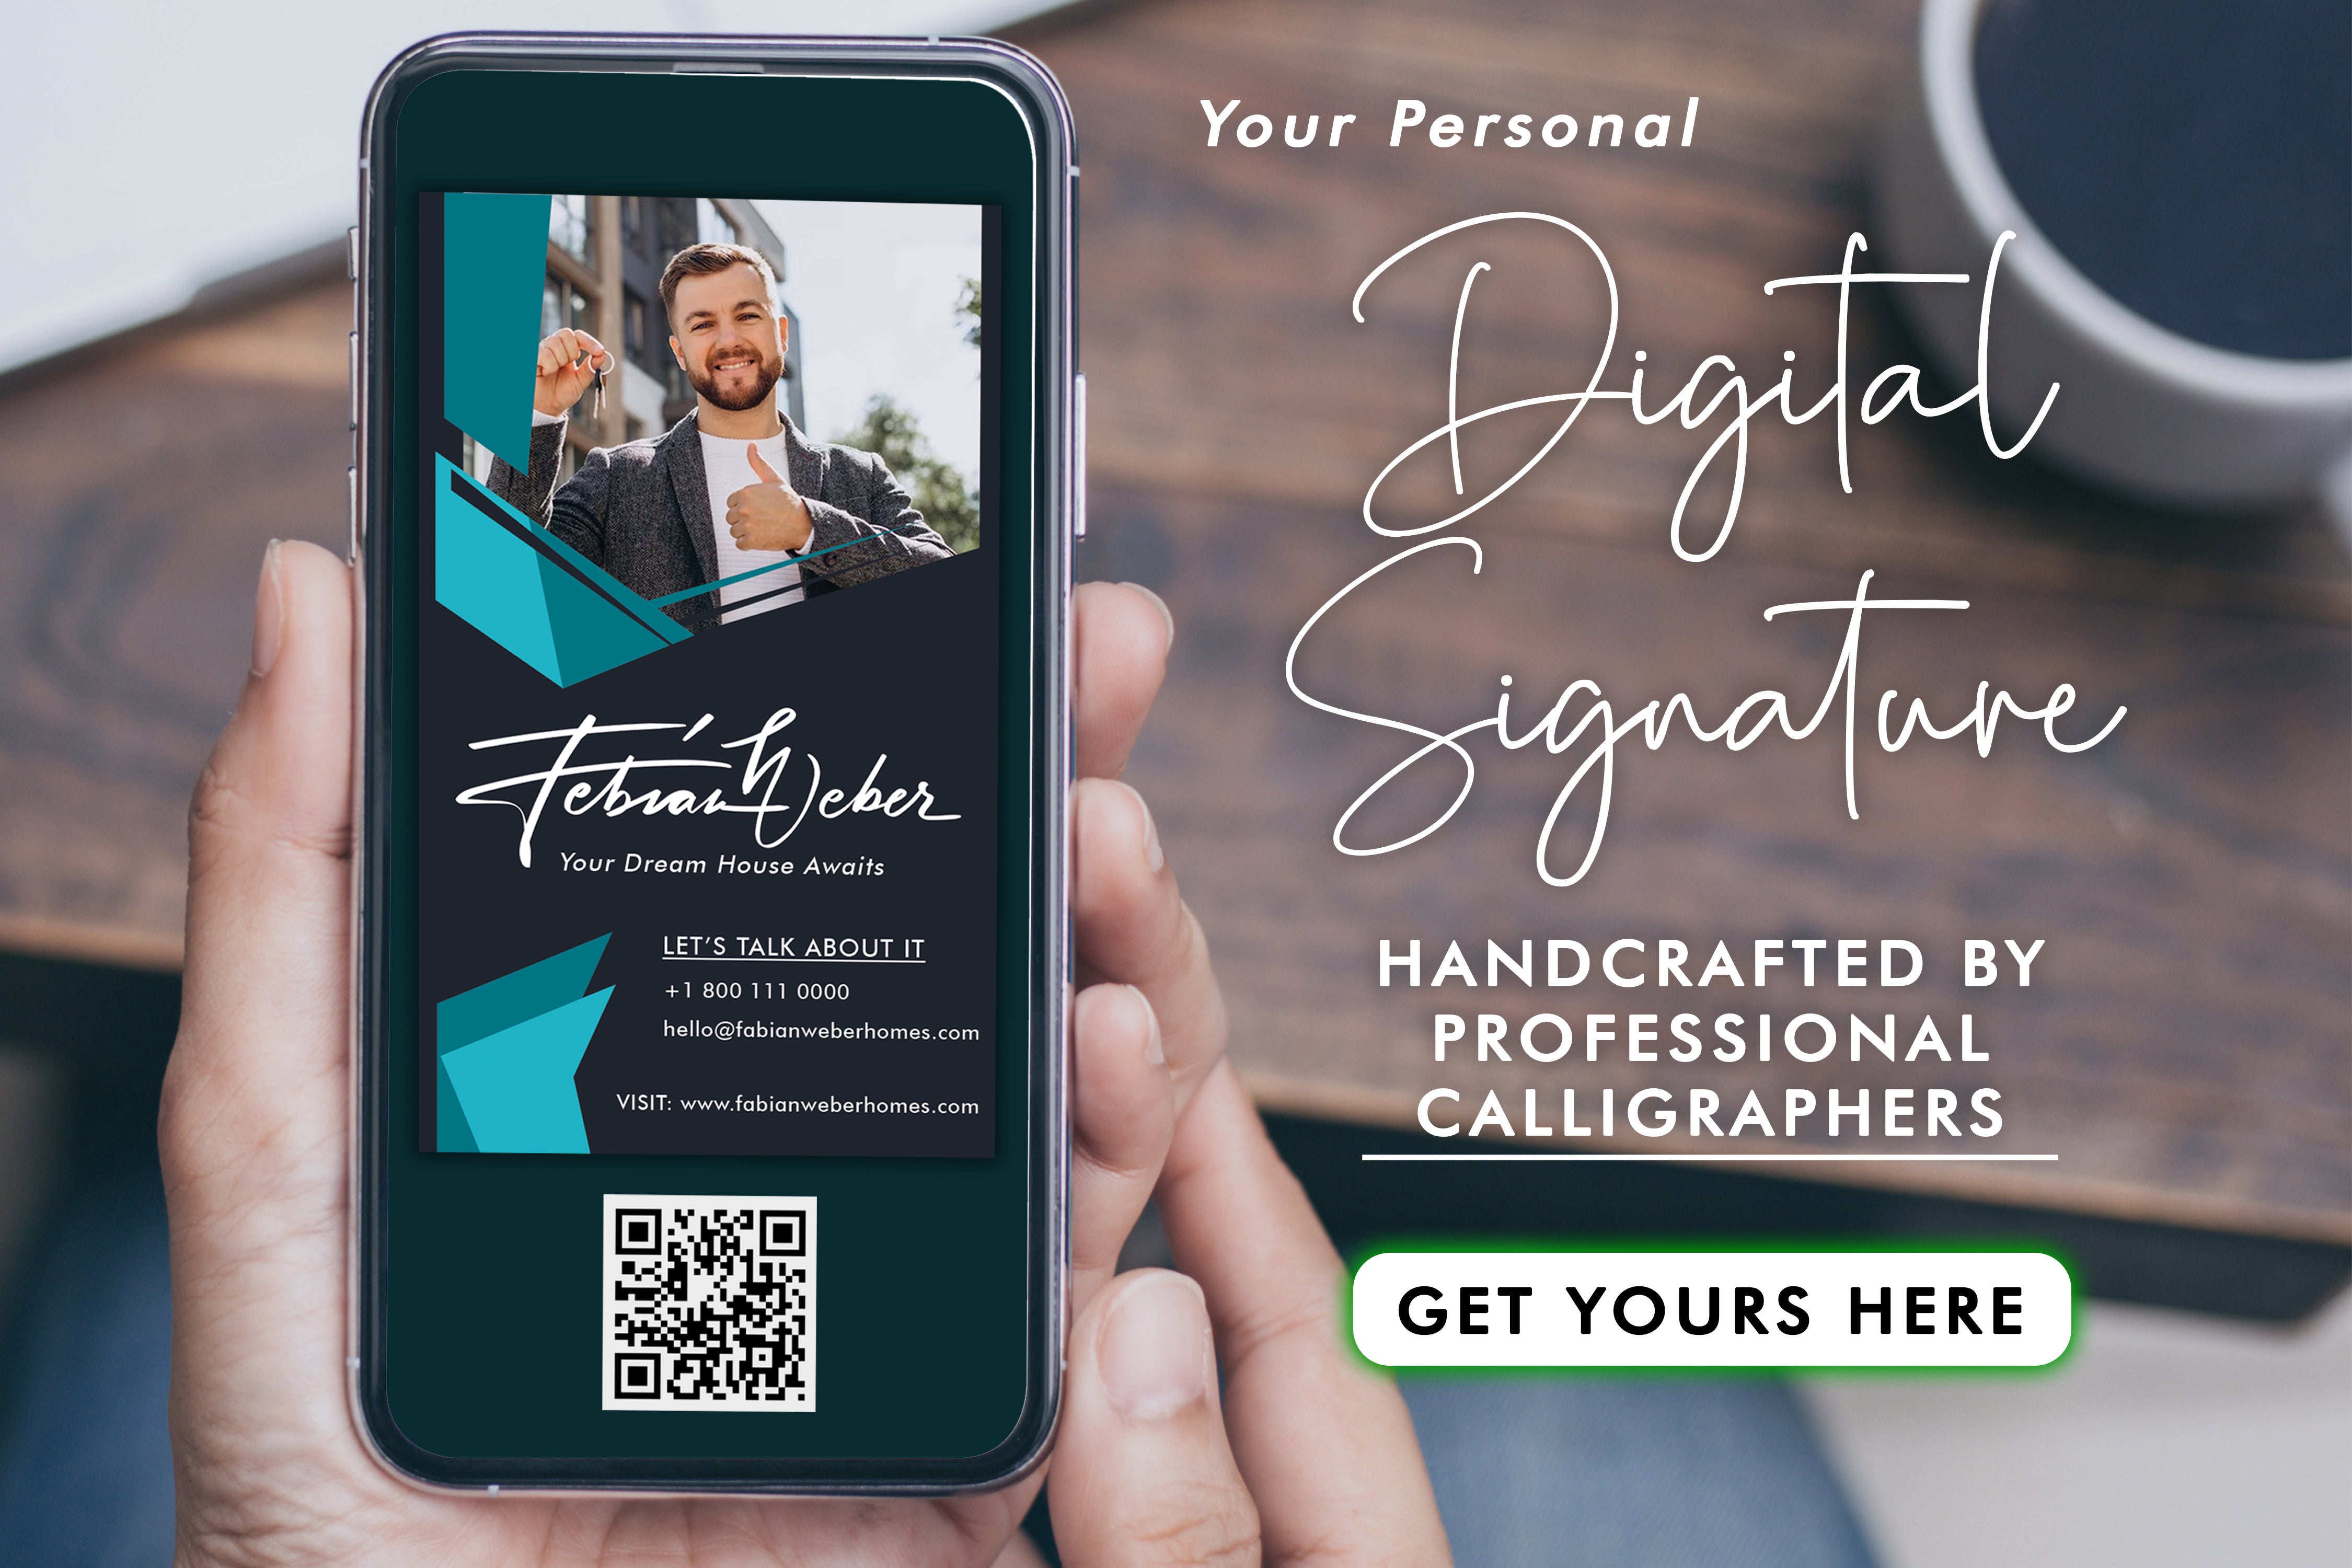 See the modern way to showcase your skills and contact information with a digital business card. Elevate your professional image and make lasting connections.